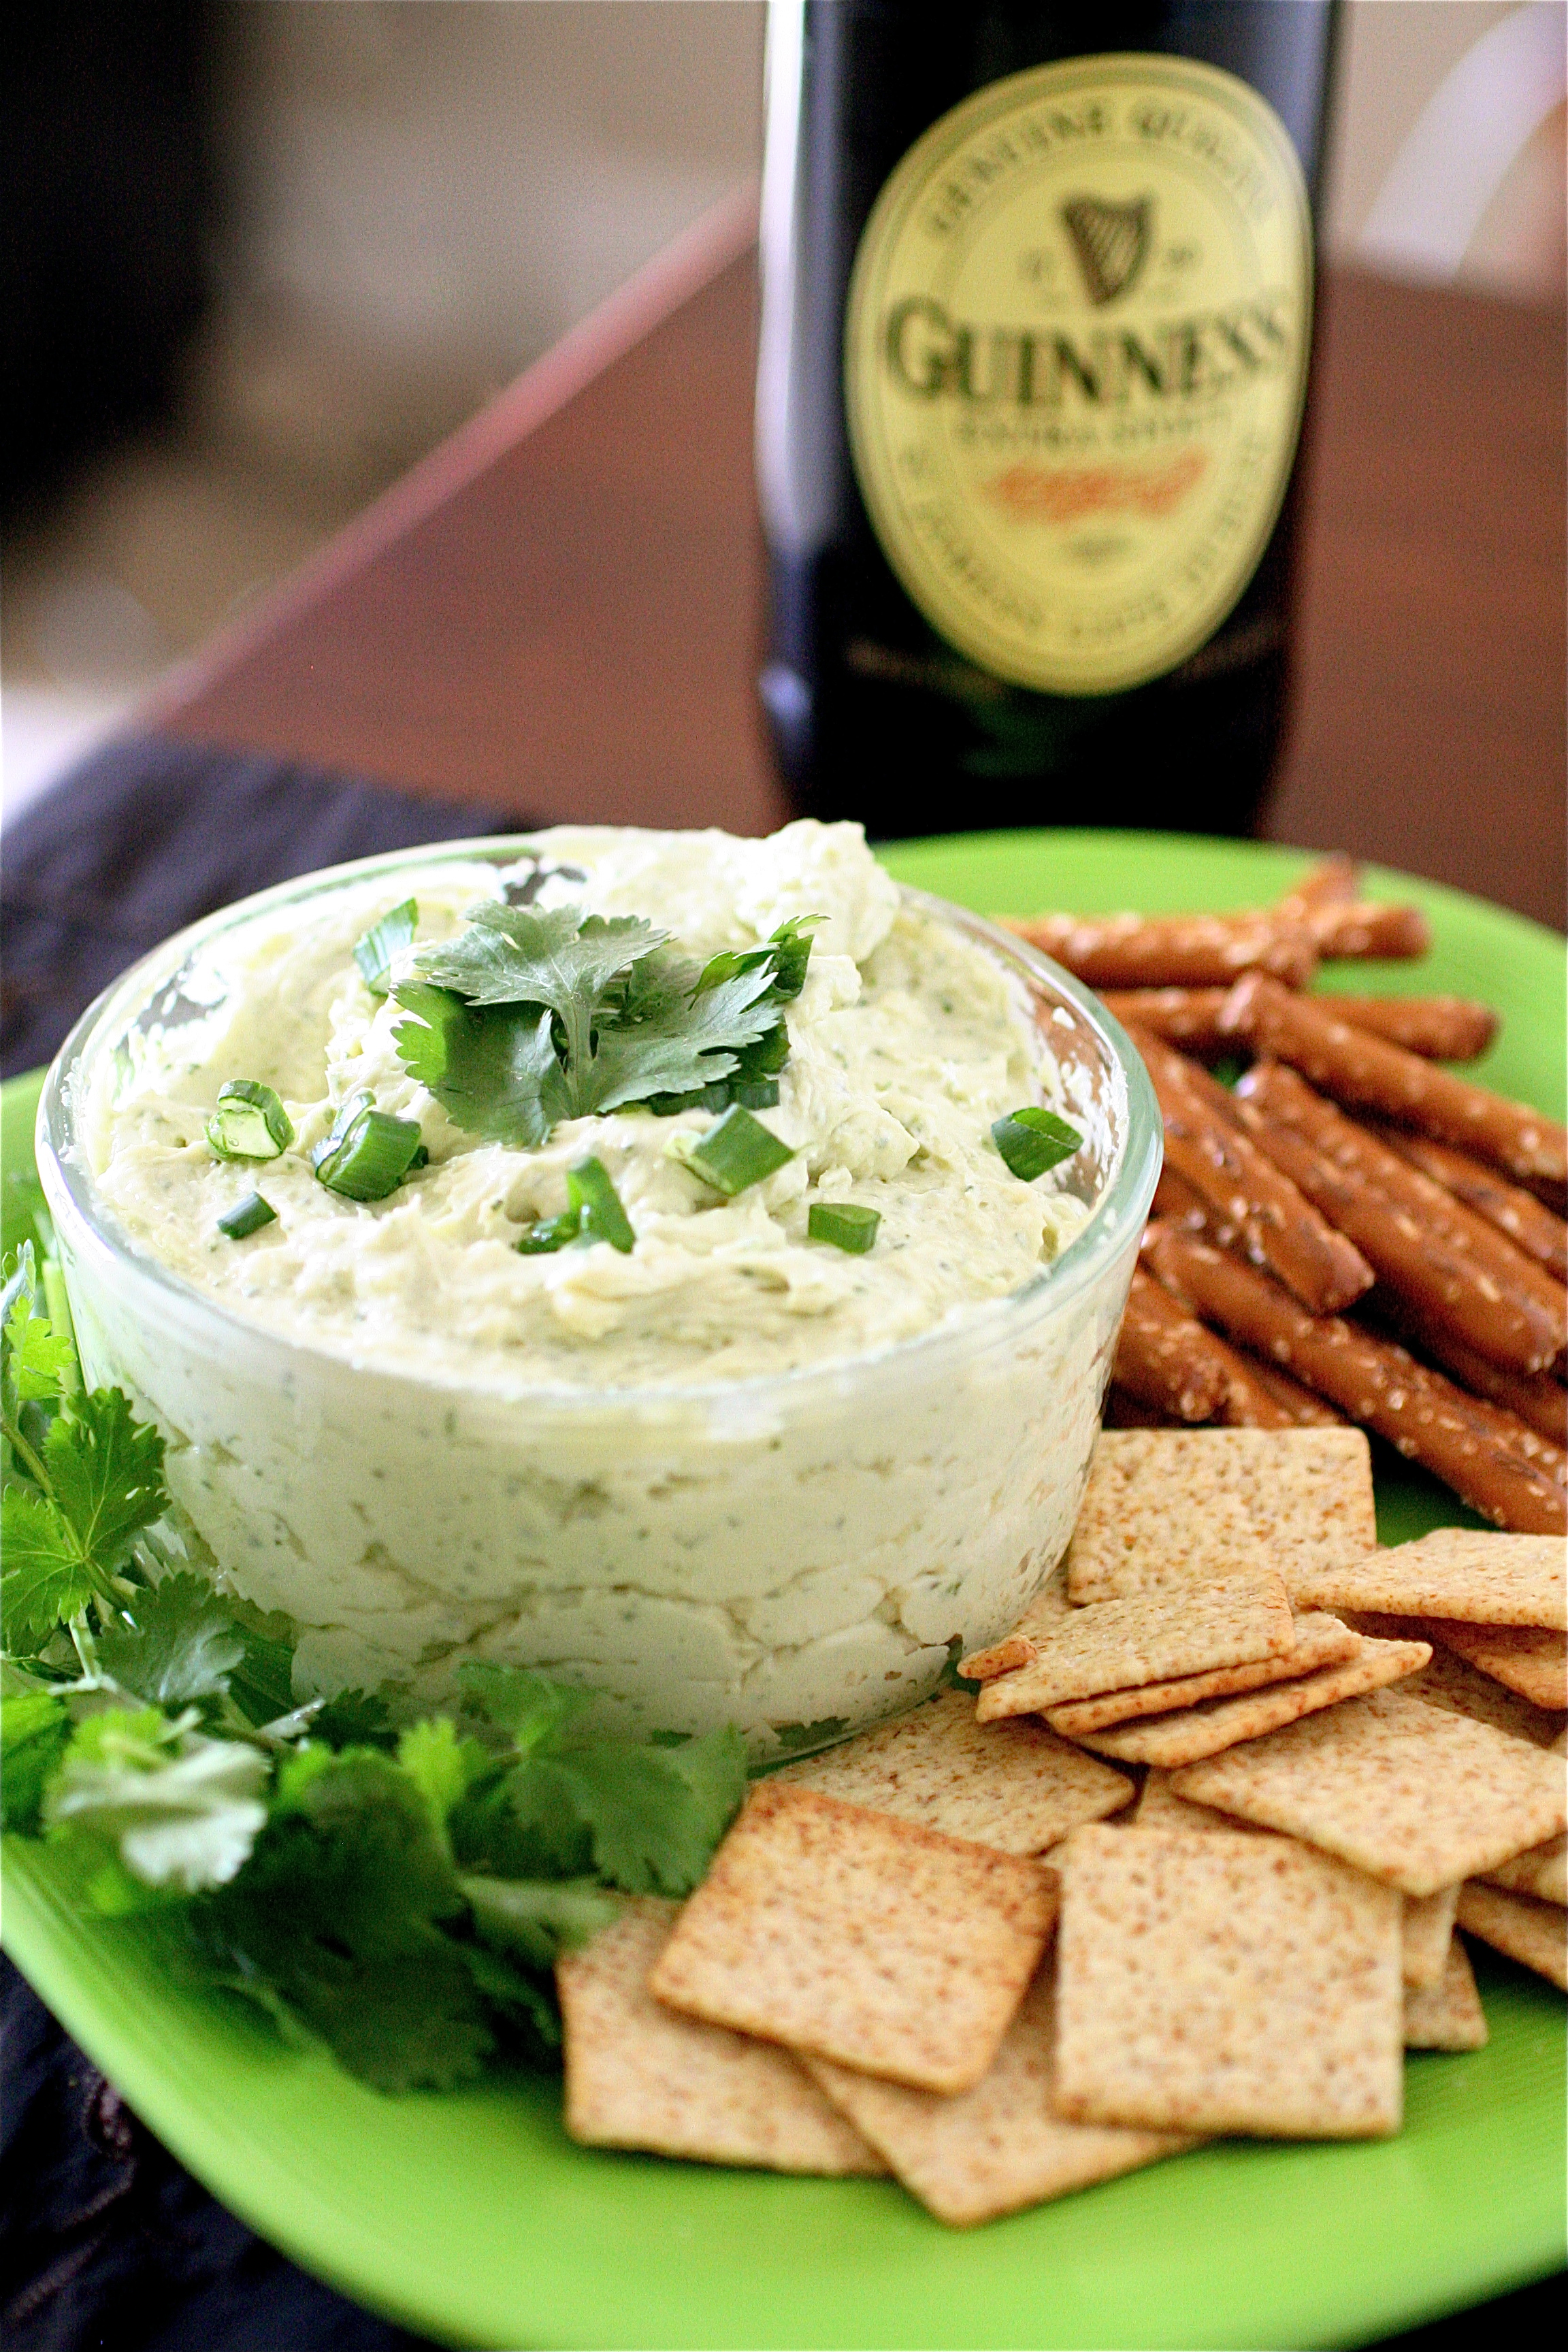 Guinness And Cheddar Dip | The Curvy Carrot